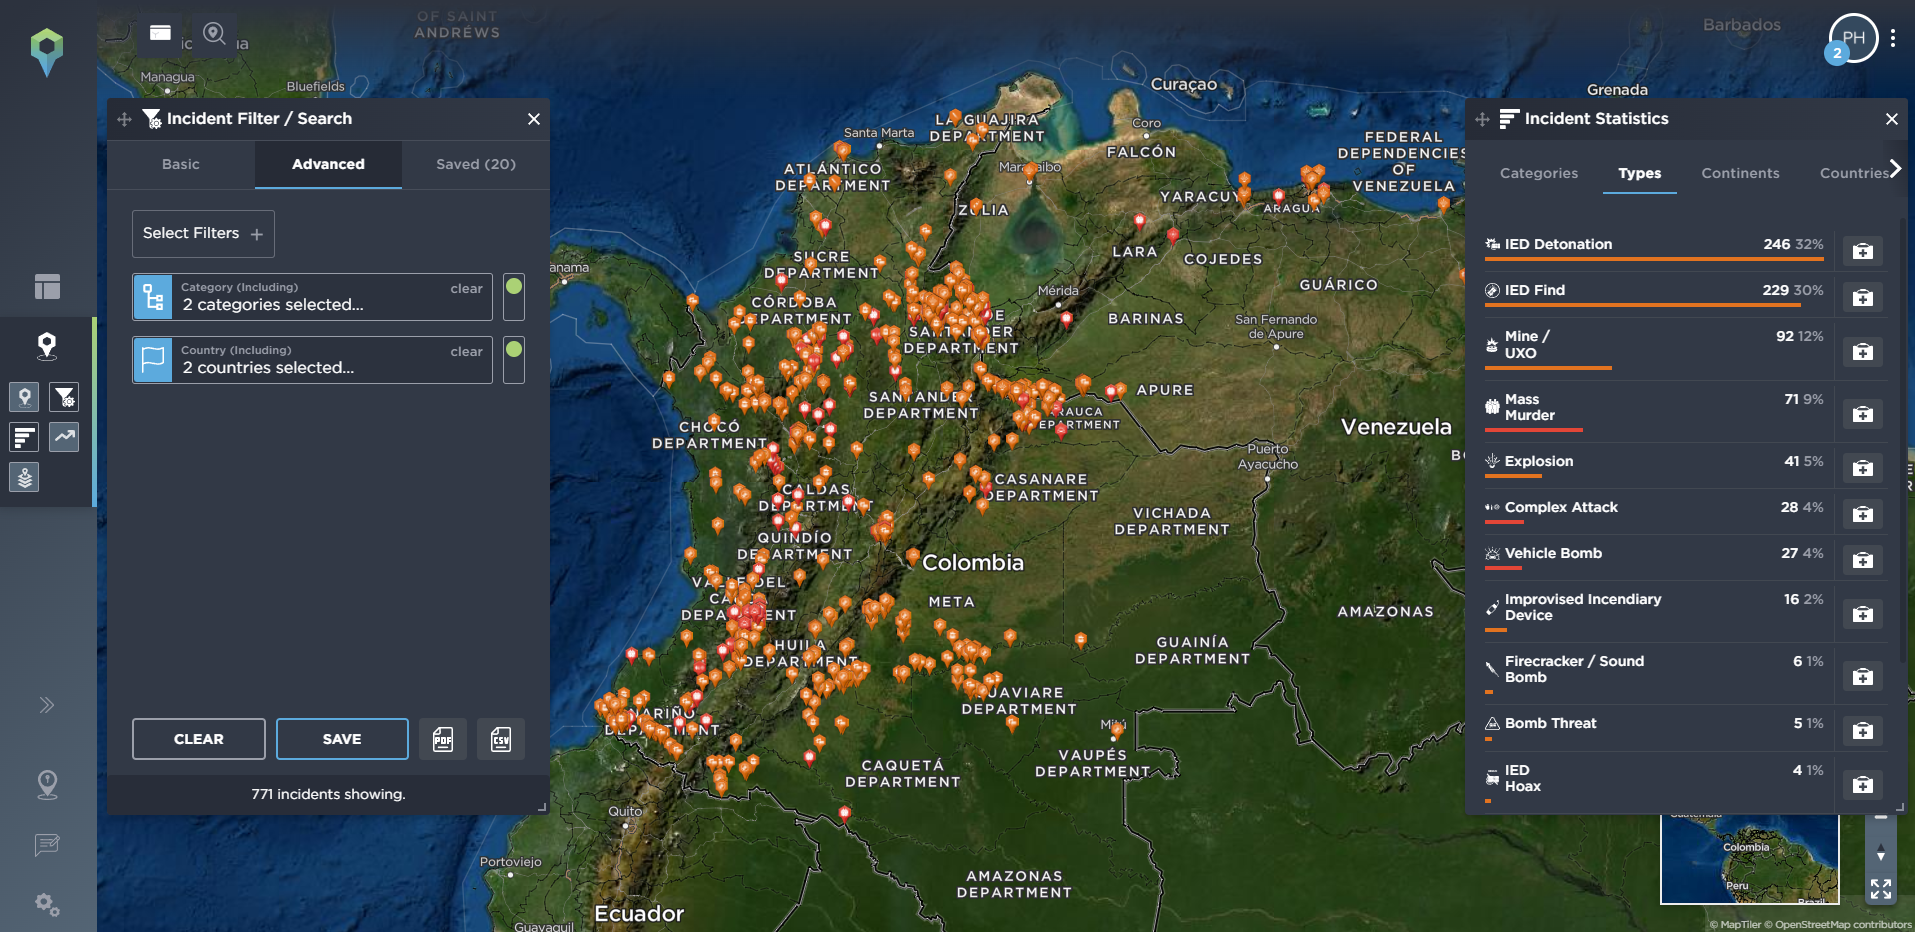 complex attacks, mass murders, bombings insurgency tracking conflict in colombia venezula using threat intelligence software